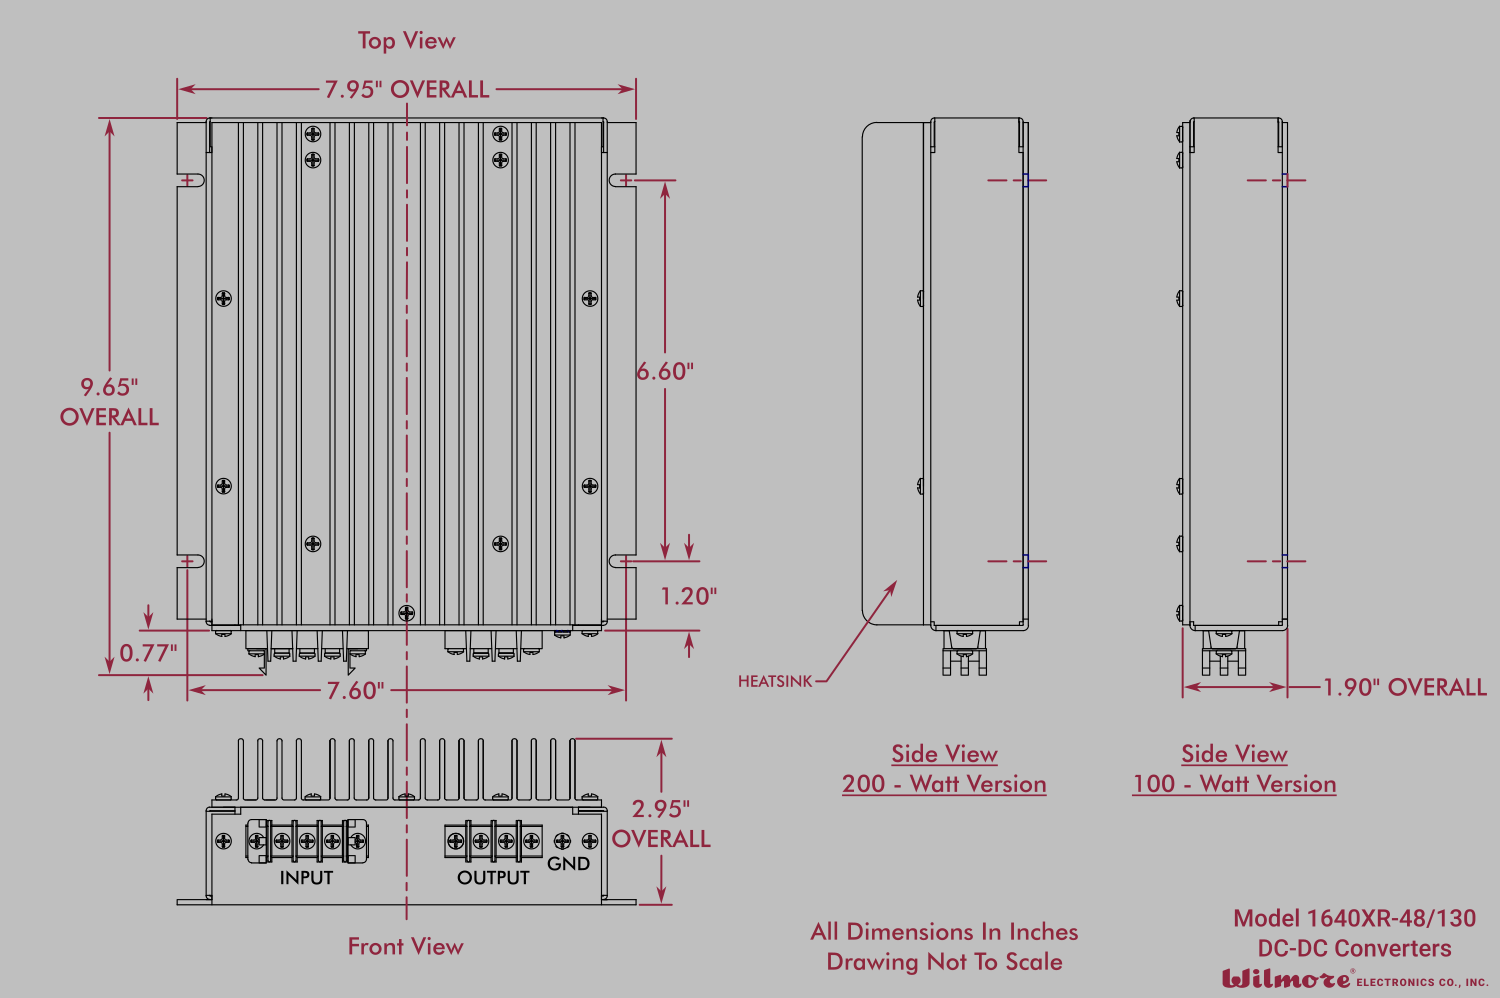 Series 1640XR Product Dimensions